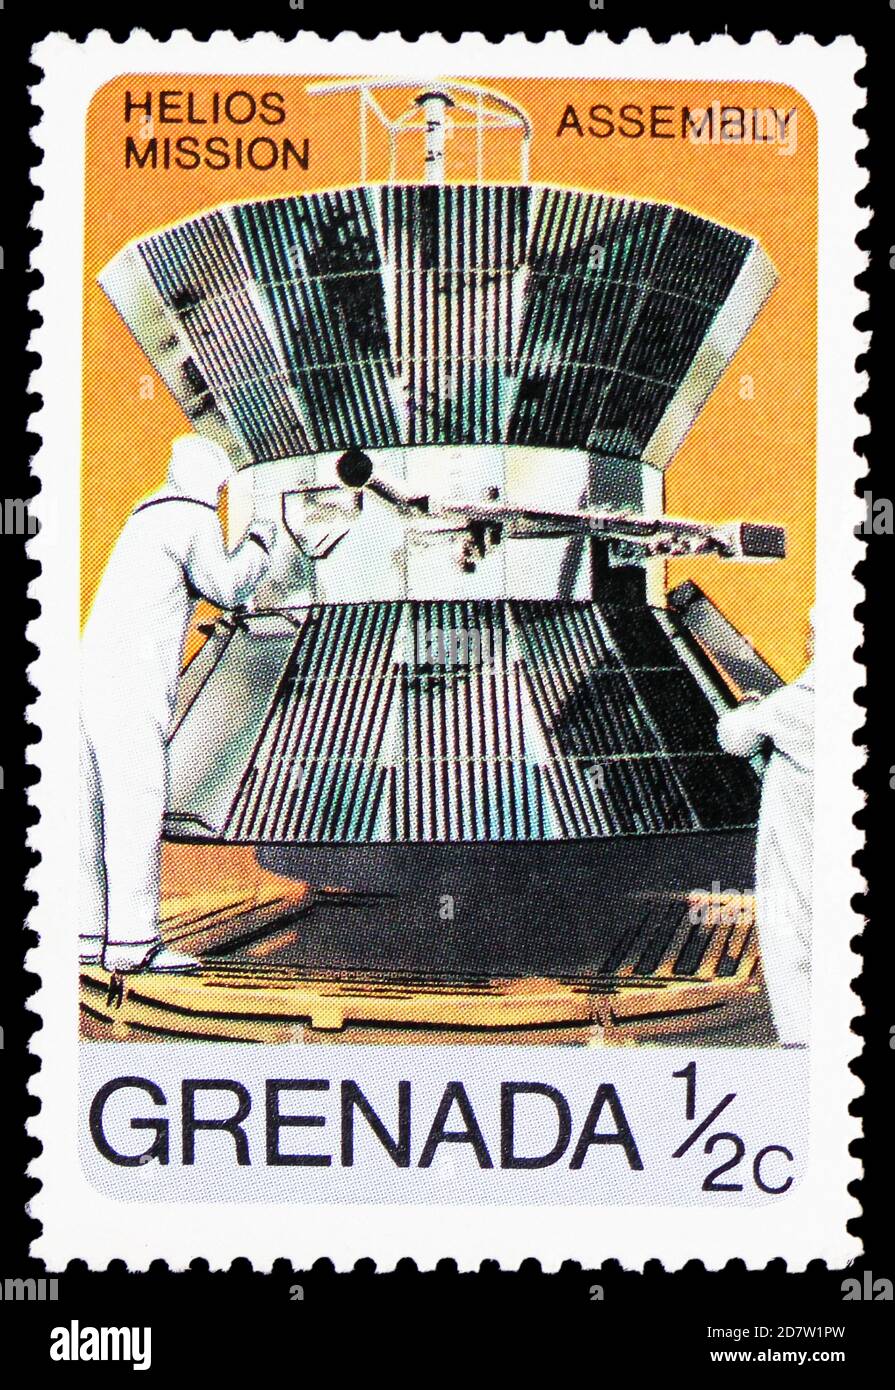 MOSCOW, RUSSIA - OCTOBER 9, 2020: Postage stamp printed in Grenada shows Helios Assembly, Viking and Helios Space Missions serie, circa 1976 Stock Photo